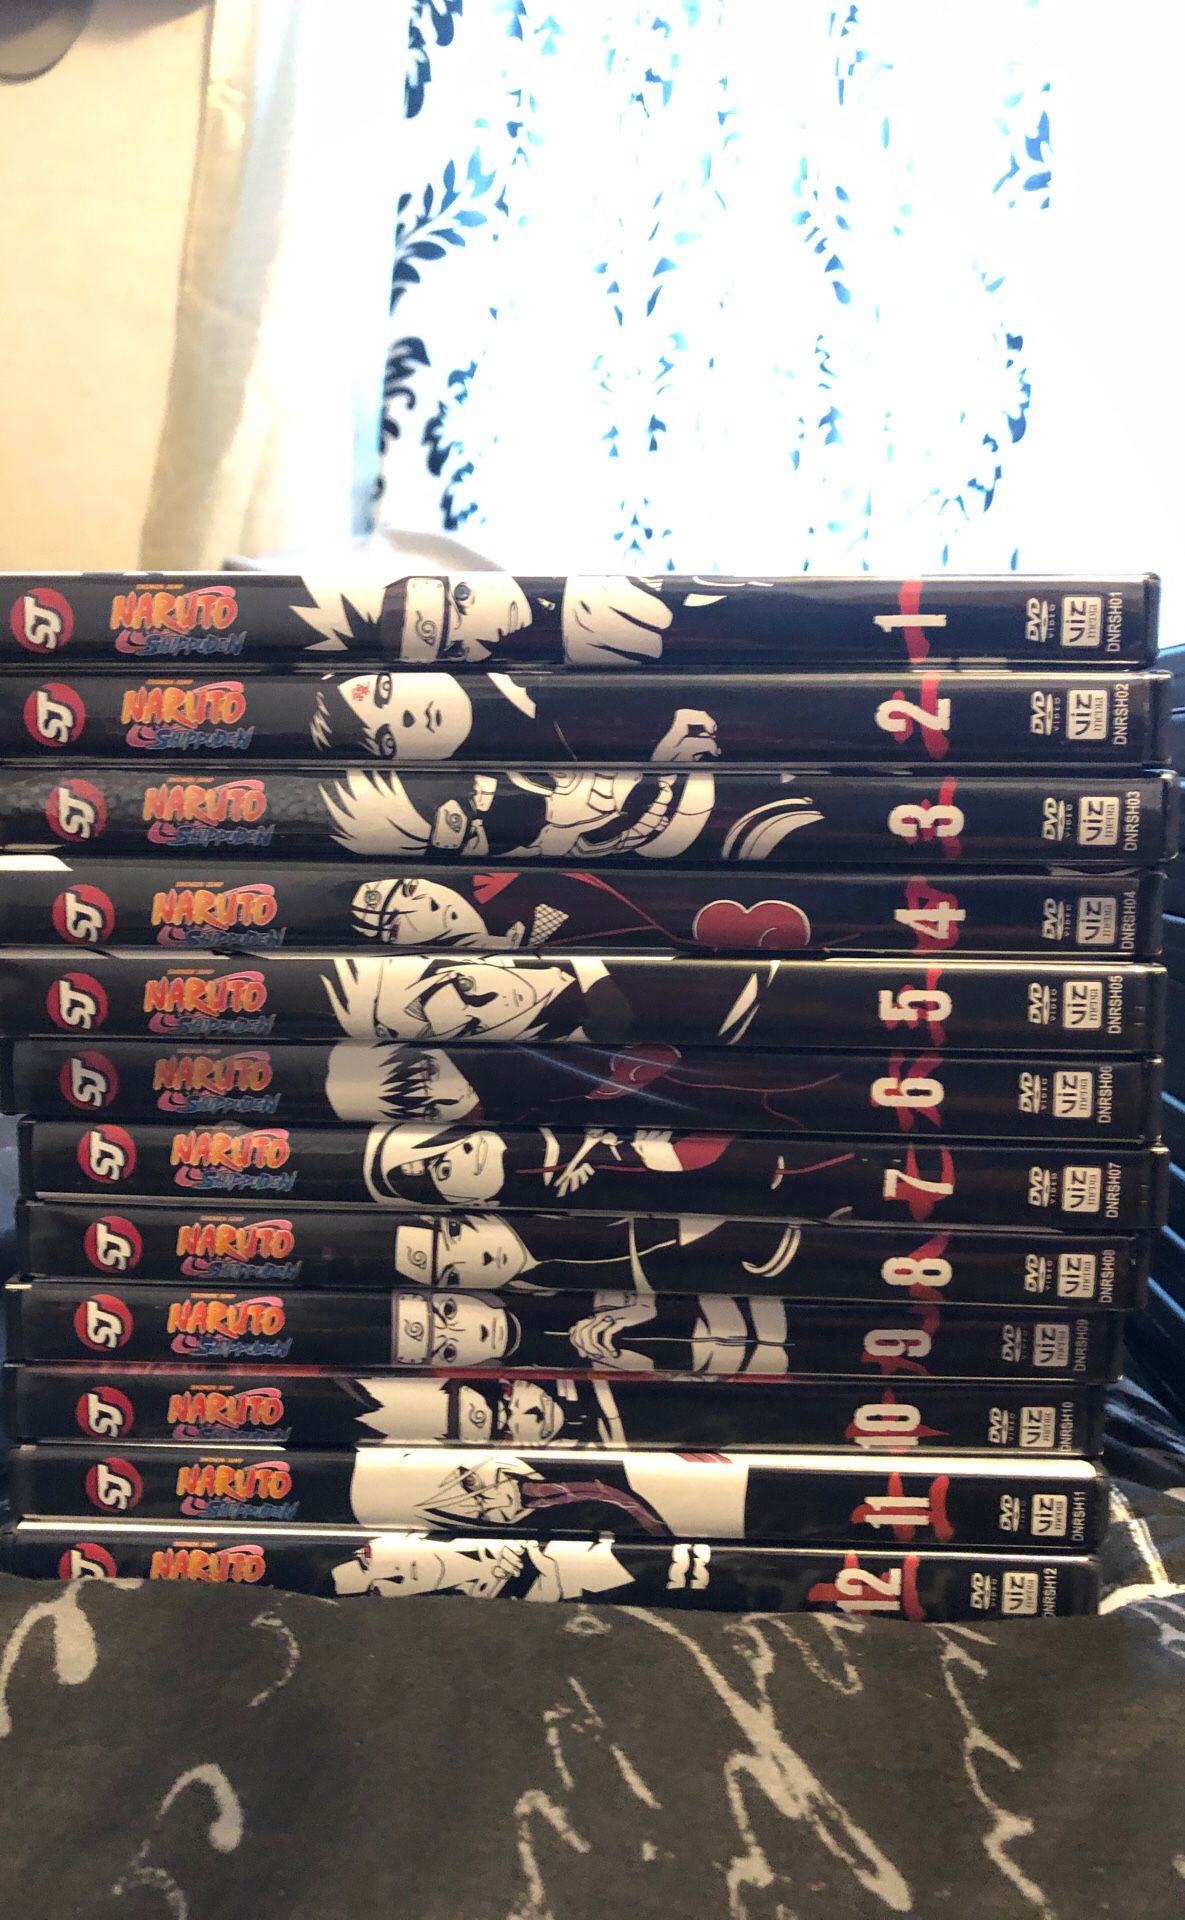 Naruto Shippuden1-37 box sets mostly the whole collection just missing the new box set 38.